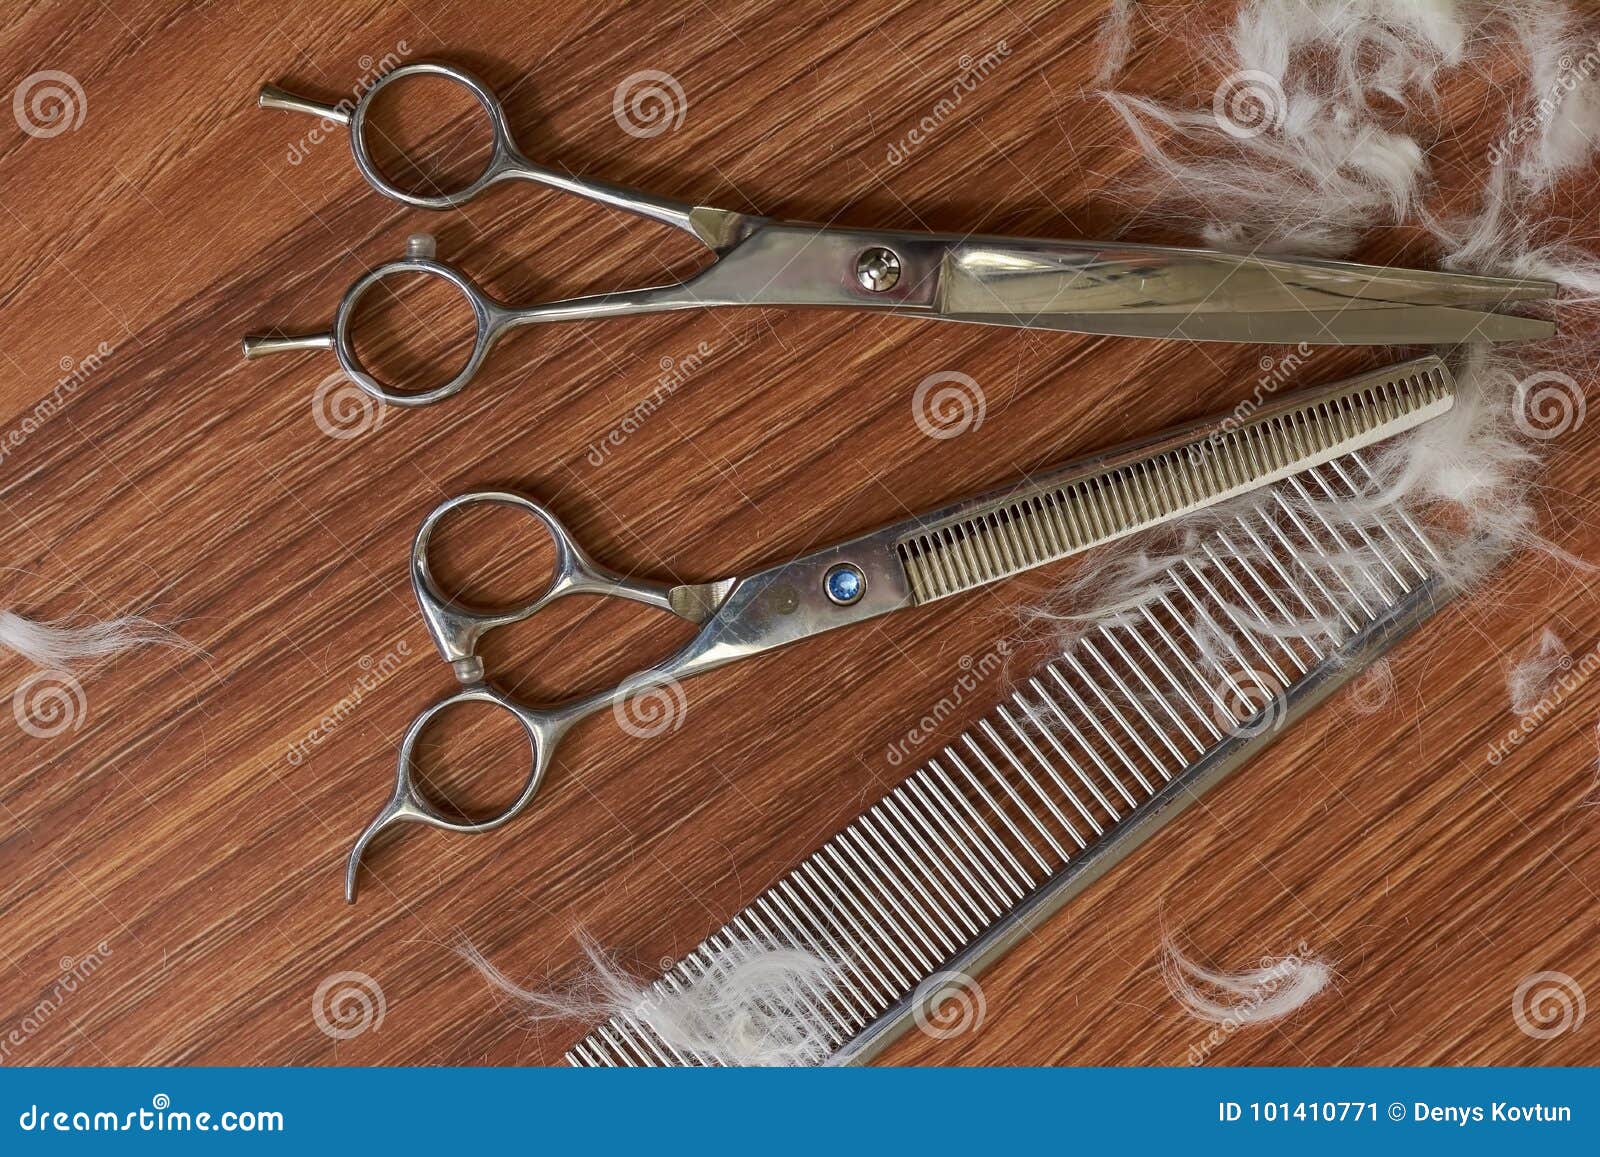 6,854 Pet Grooming Scissors Stock Photos - Free & Royalty-Free Stock Photos  from Dreamstime